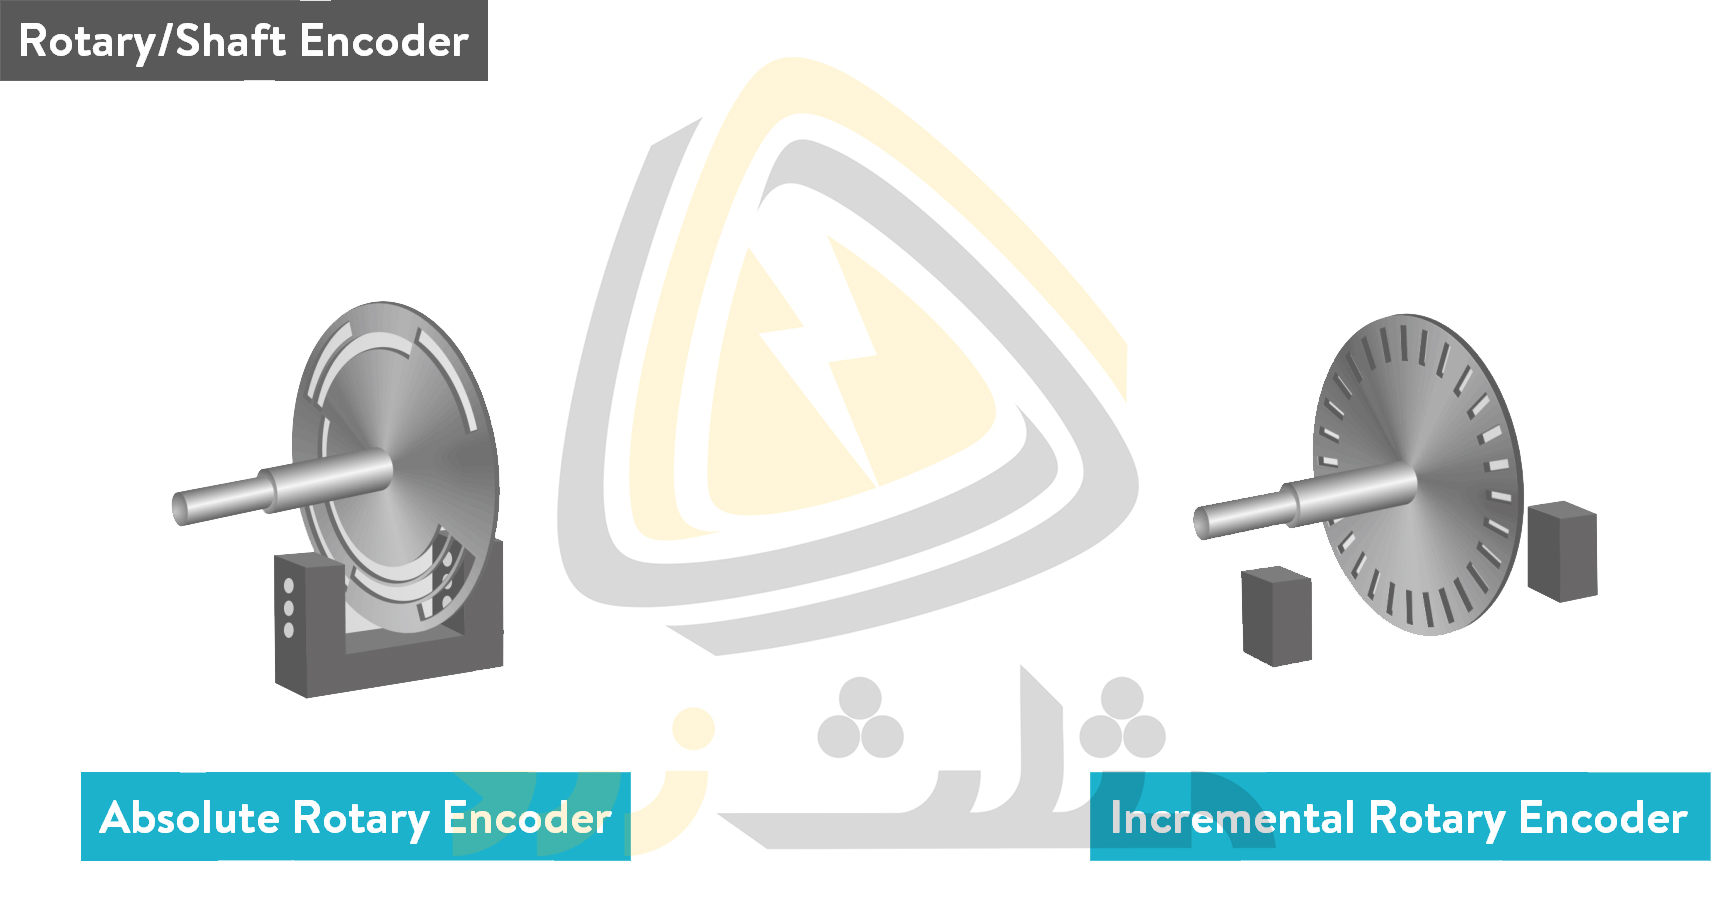 Absolute and Incremental Rotary Encoder